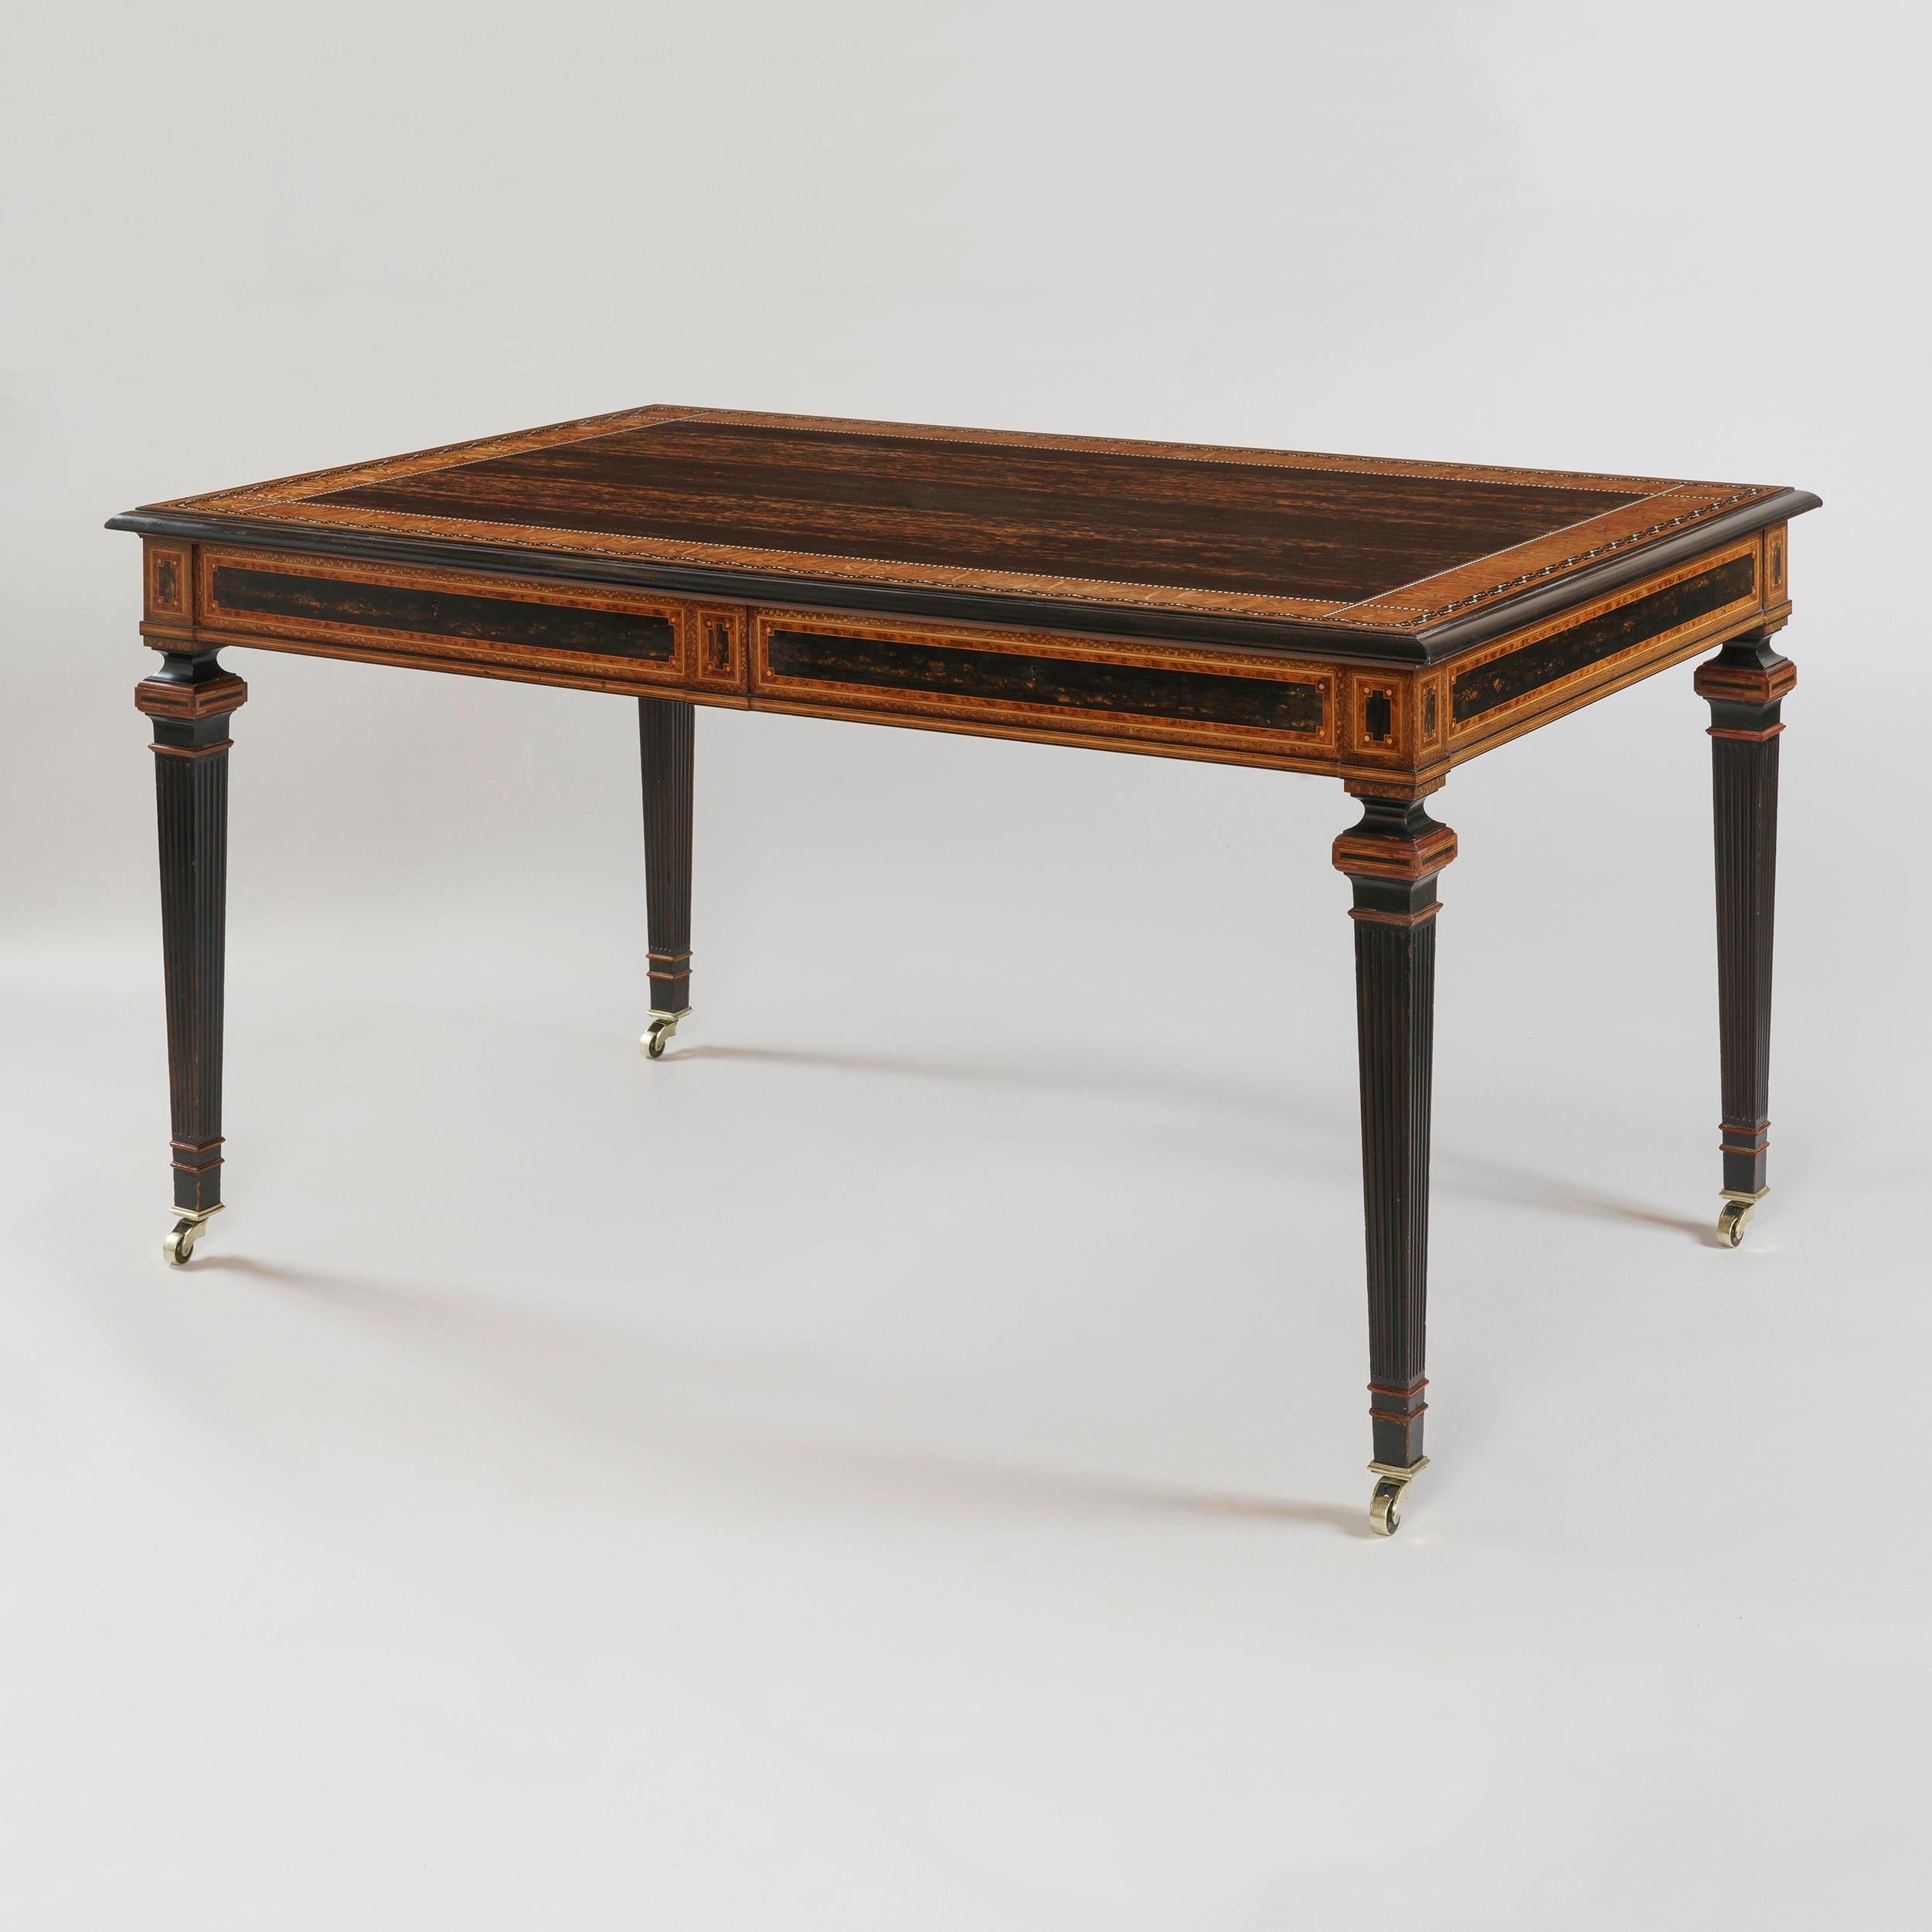 A magnificent library table 
Attributed to Jackson & Graham

Of free standing rectangular form, constructed in coromandel, with inlays in thuya, ebony, boxwood, and honeysuckle; the fluted legs rising from square brass castor-shod feet; the